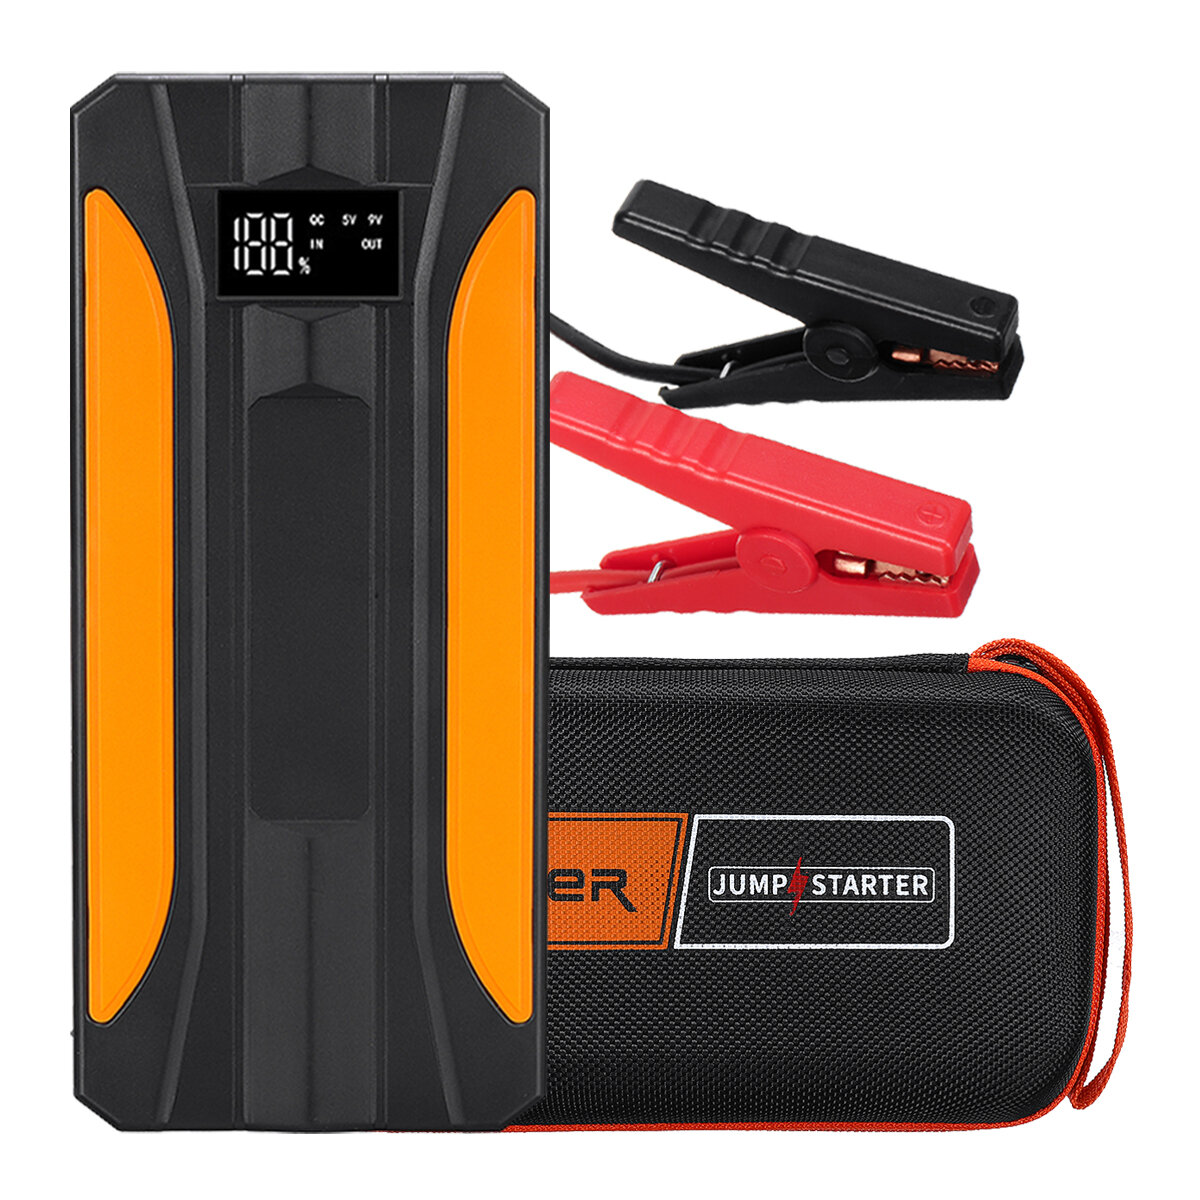 12V 89800mAh Car Jump Starter Power Bank Emergency Energy Storage with Clamps